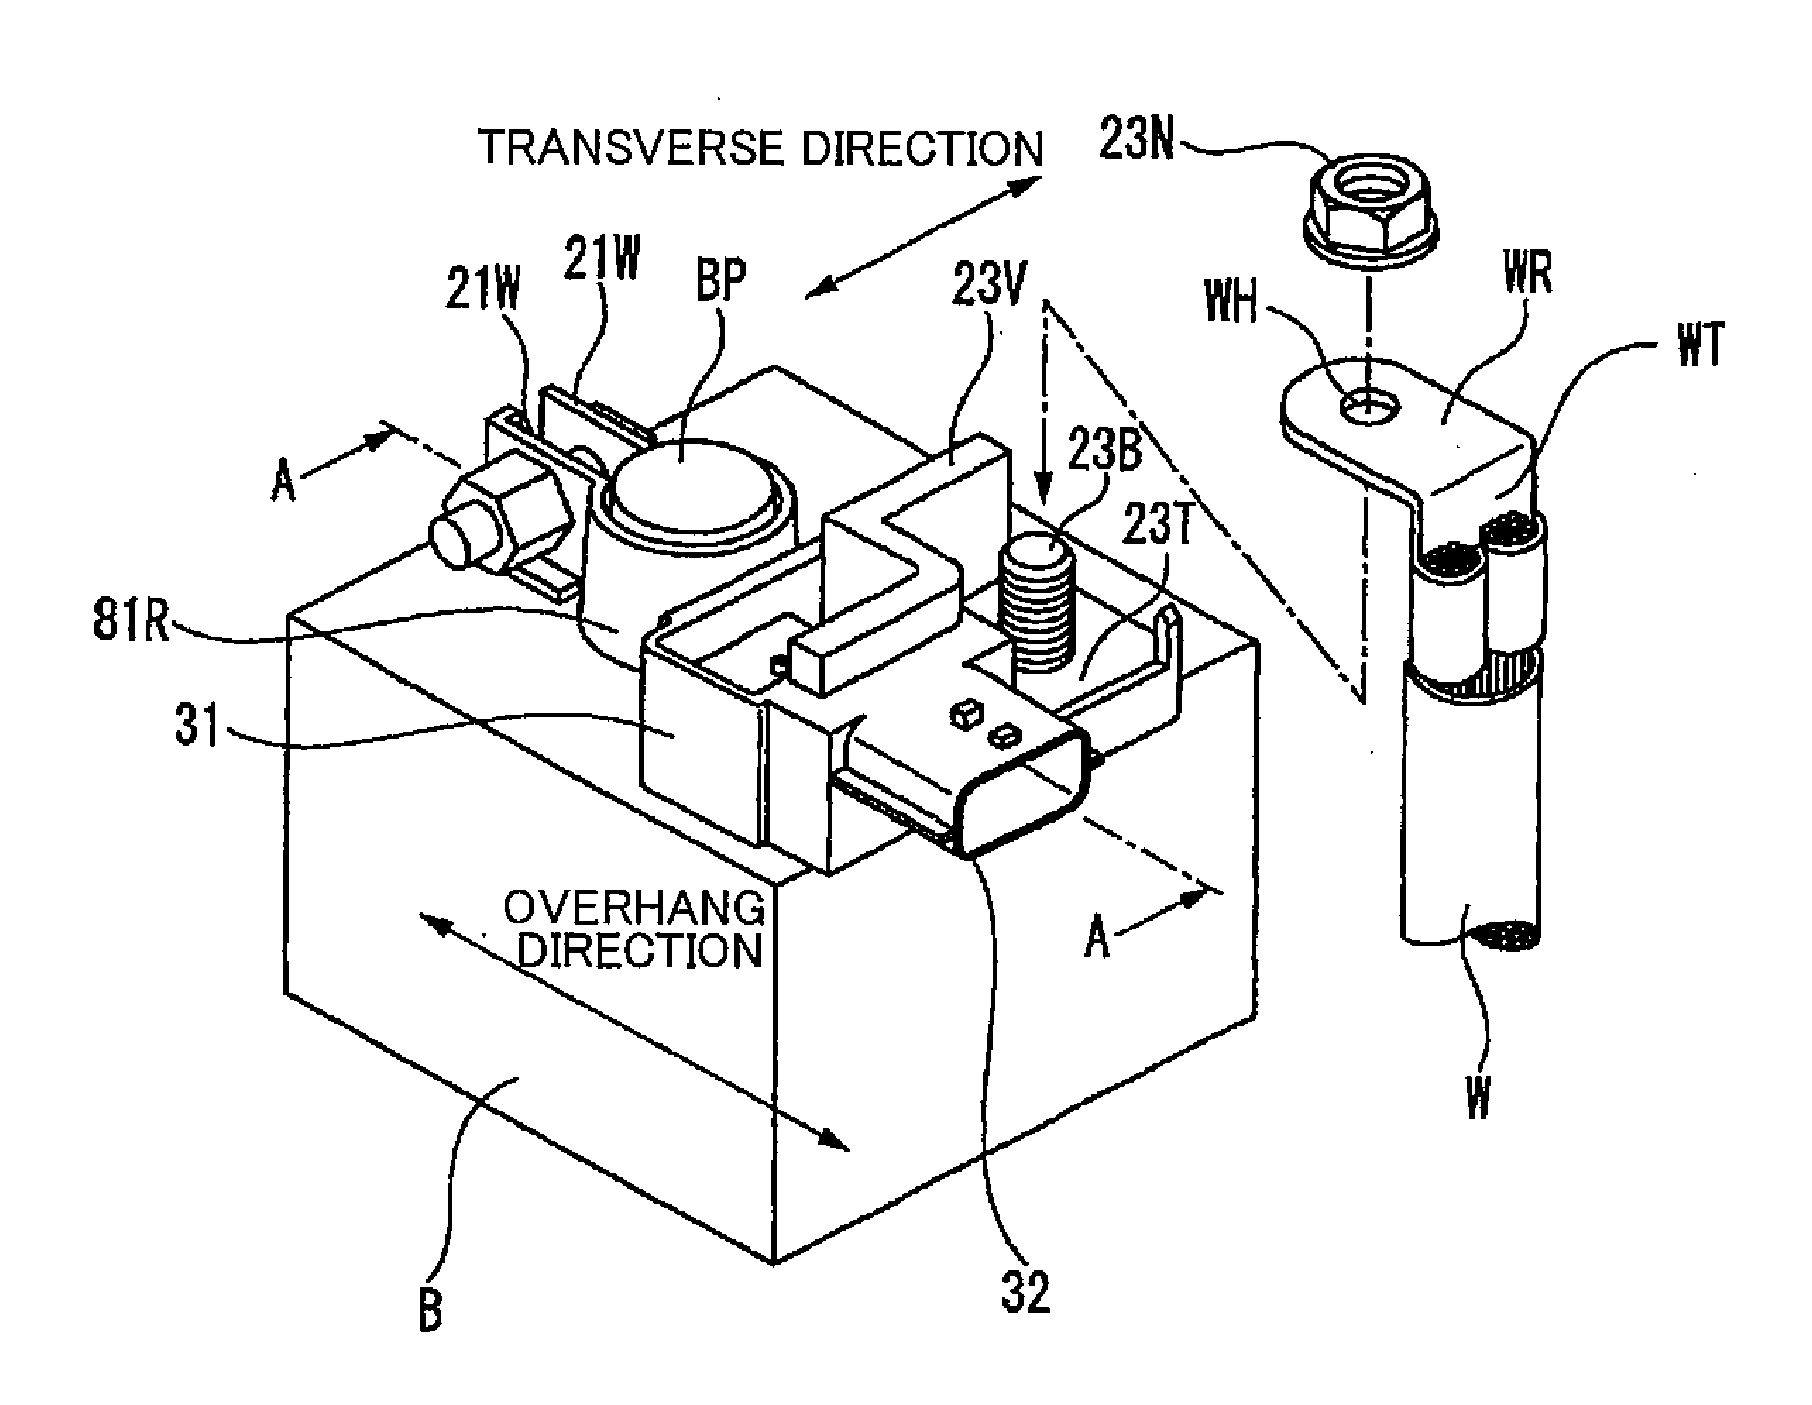 Battery terminal unit with current sensor